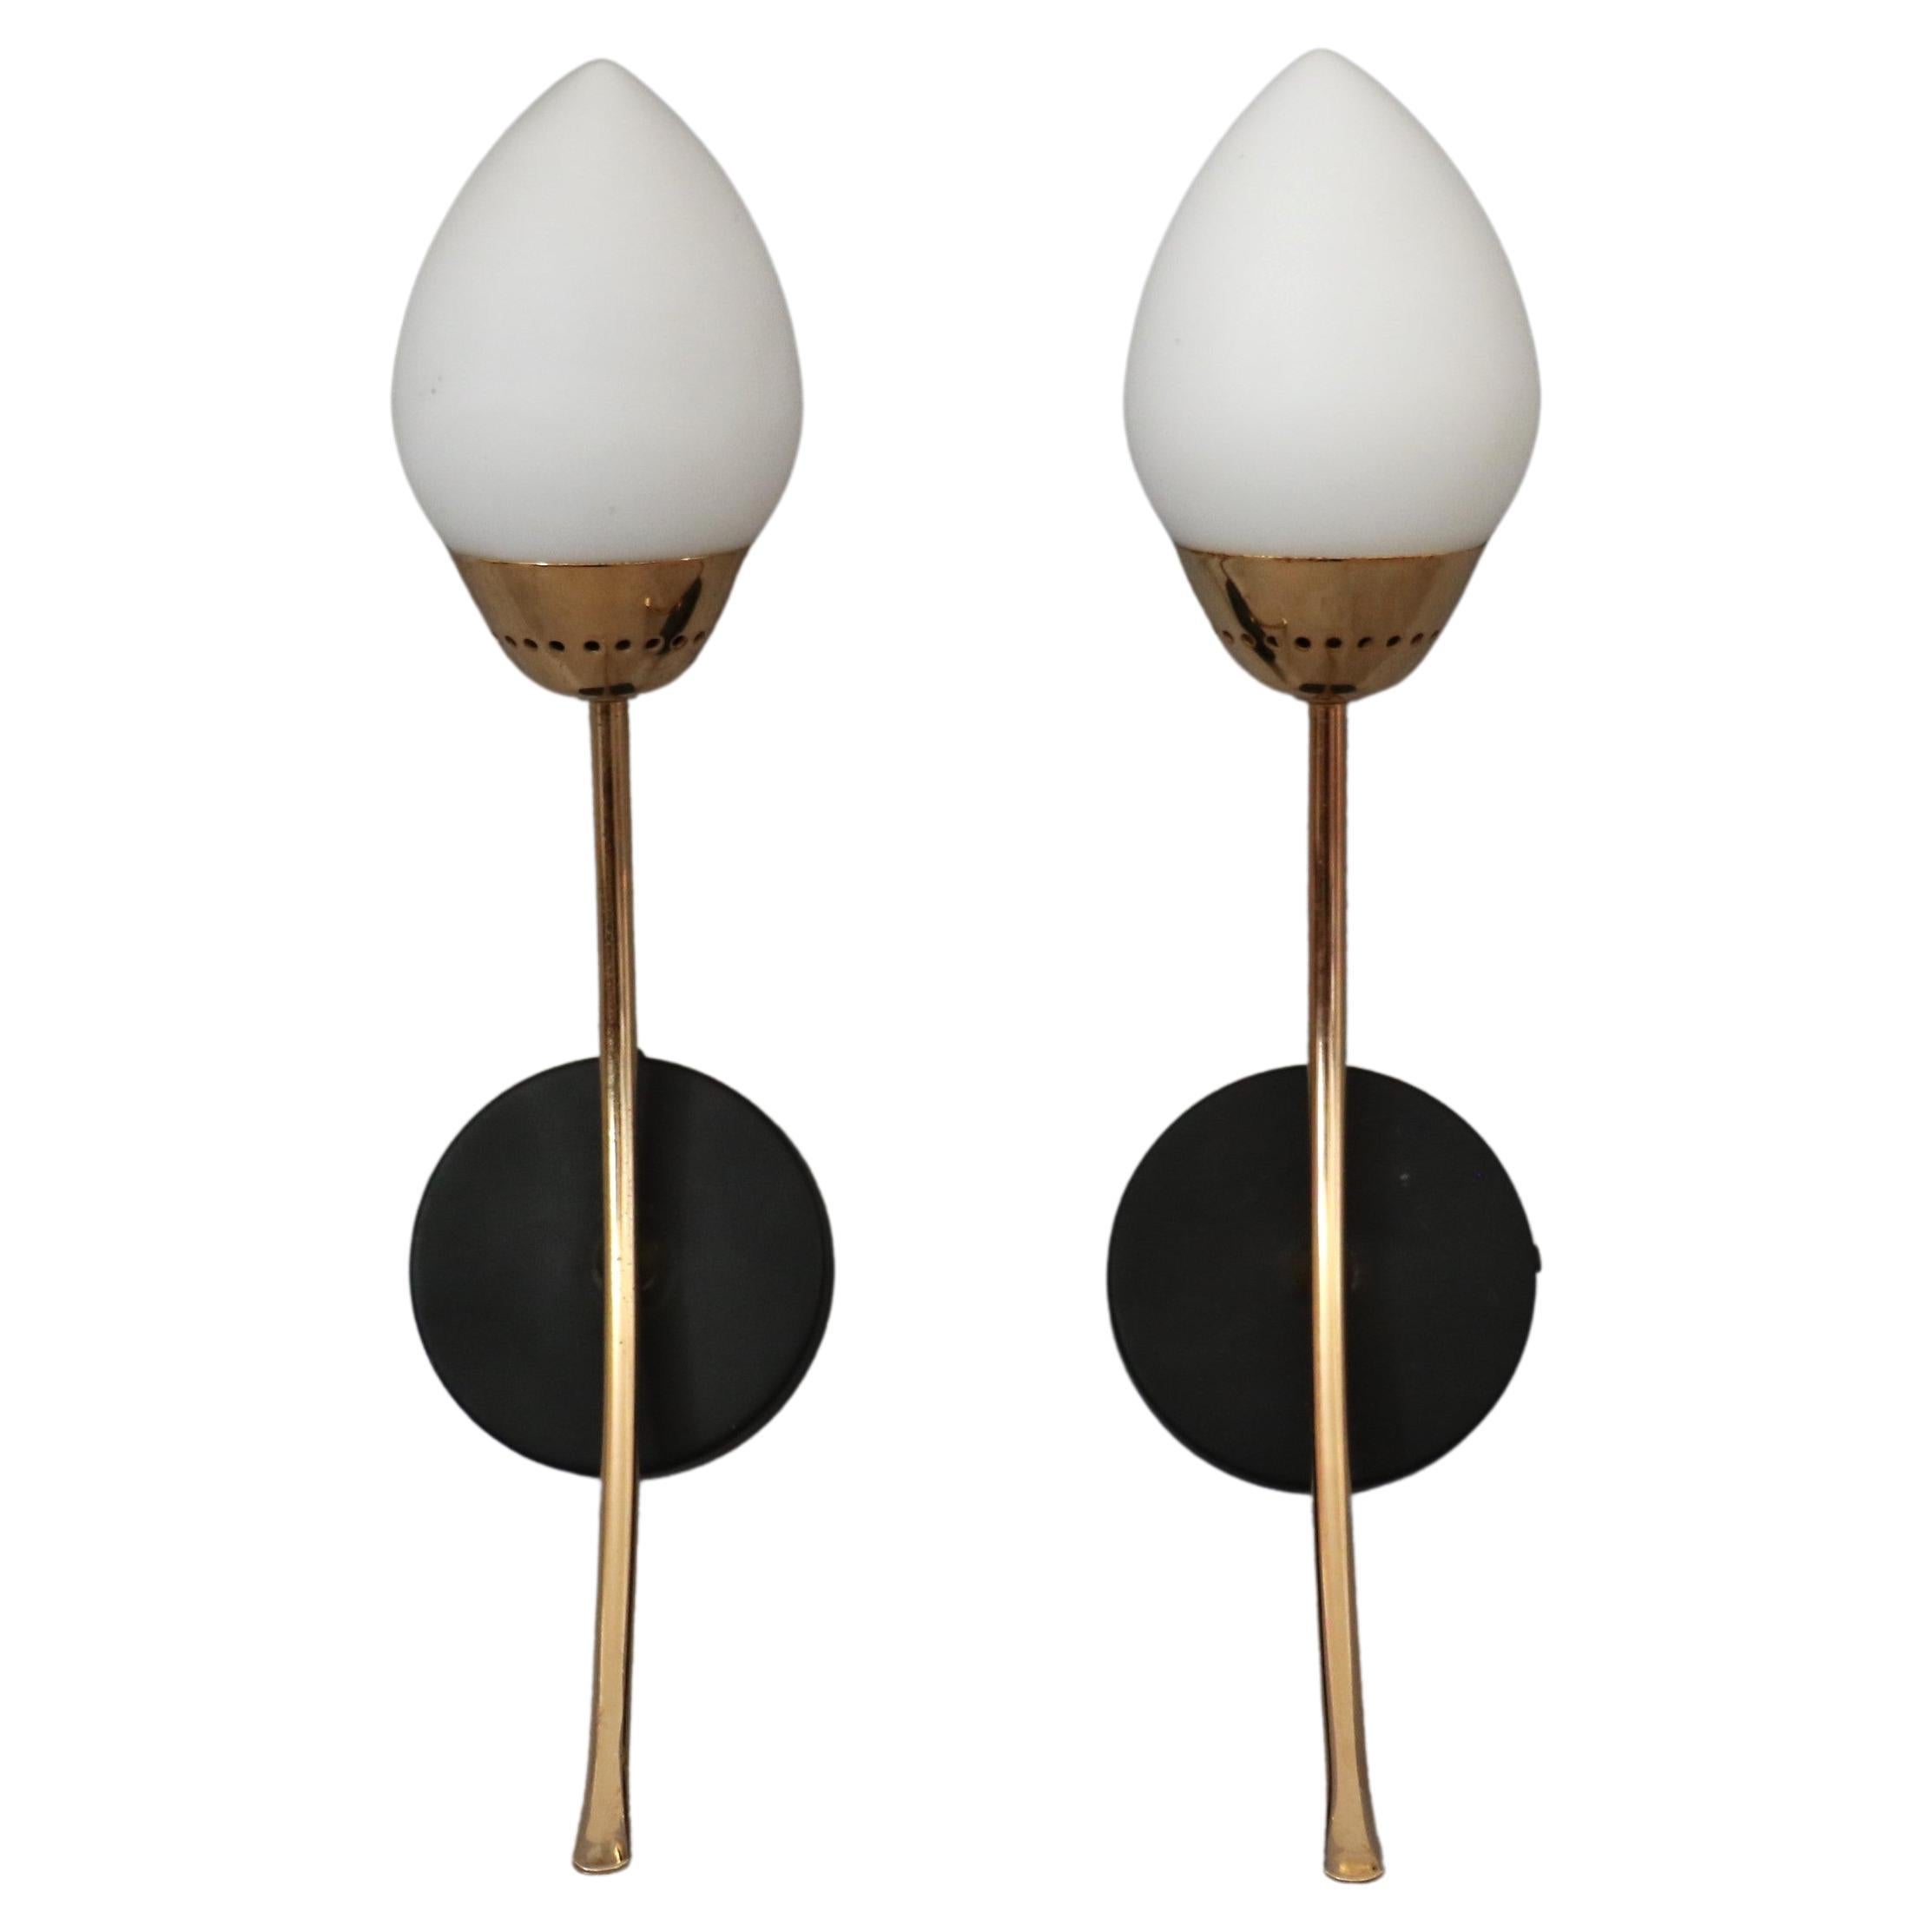 Maison Lunel - Pair of Mid-Century Modern Wall lights - 1950s France